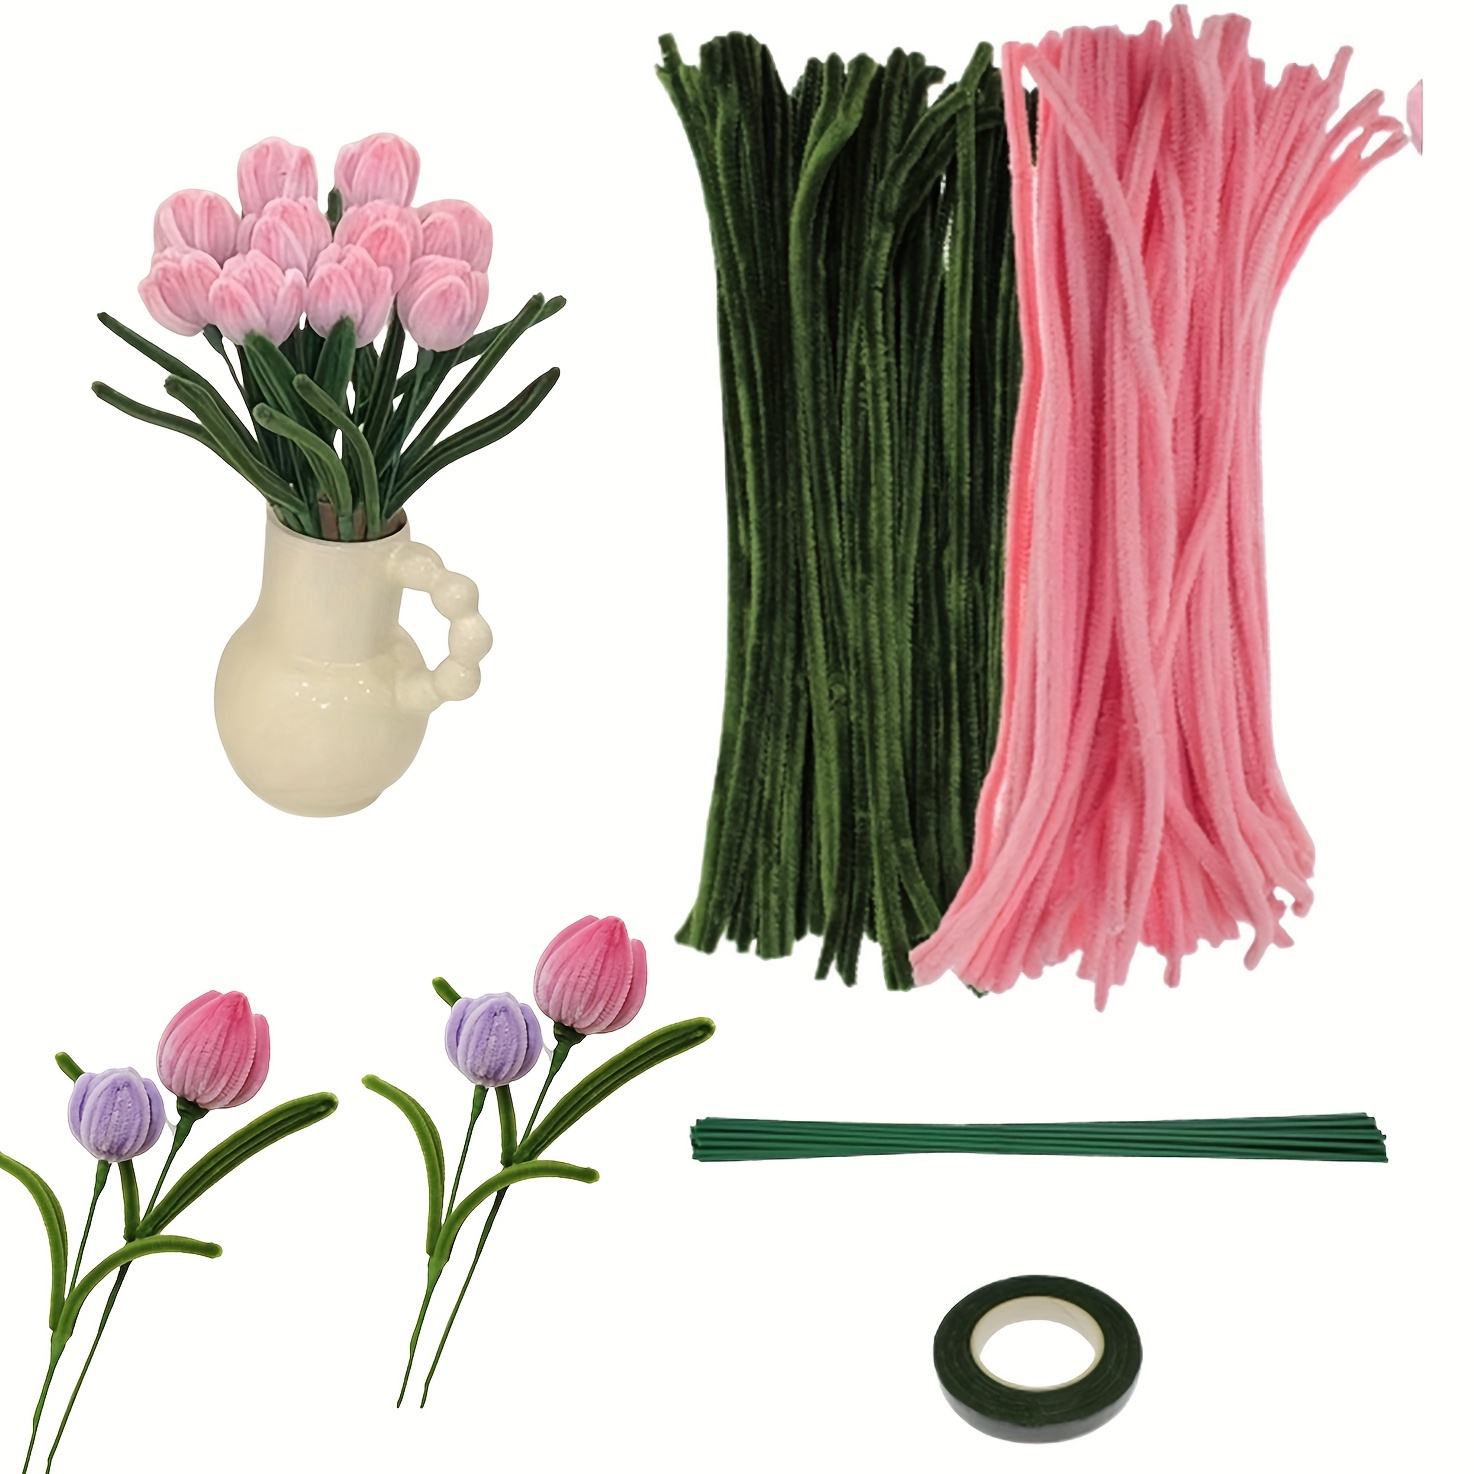 Pipe Cleaners DIY Kit - Lily Of The Valley